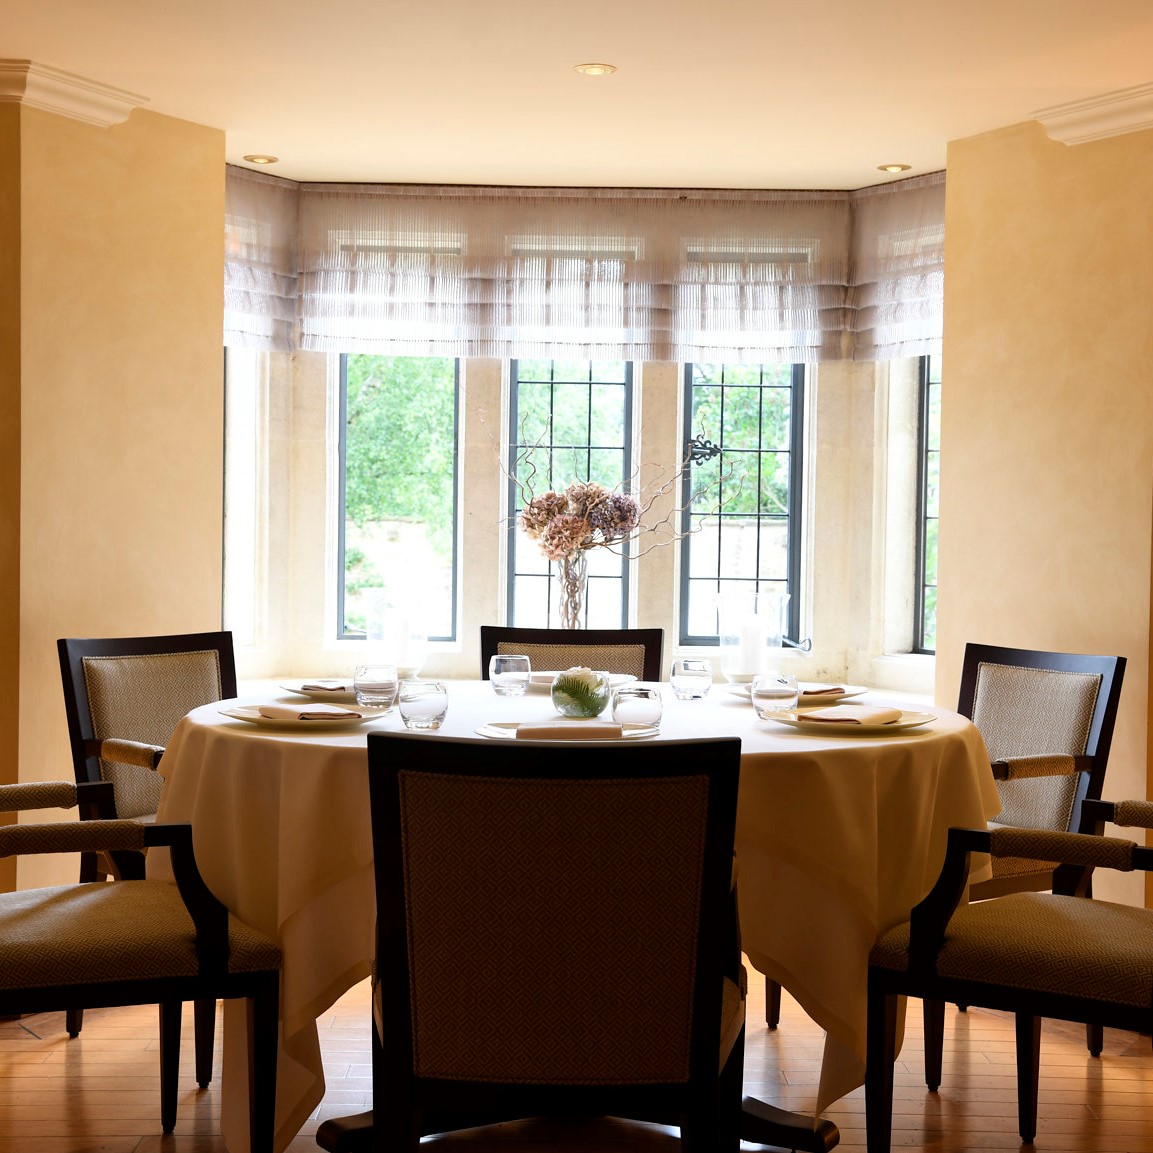 The Dining room at Whatley Manor